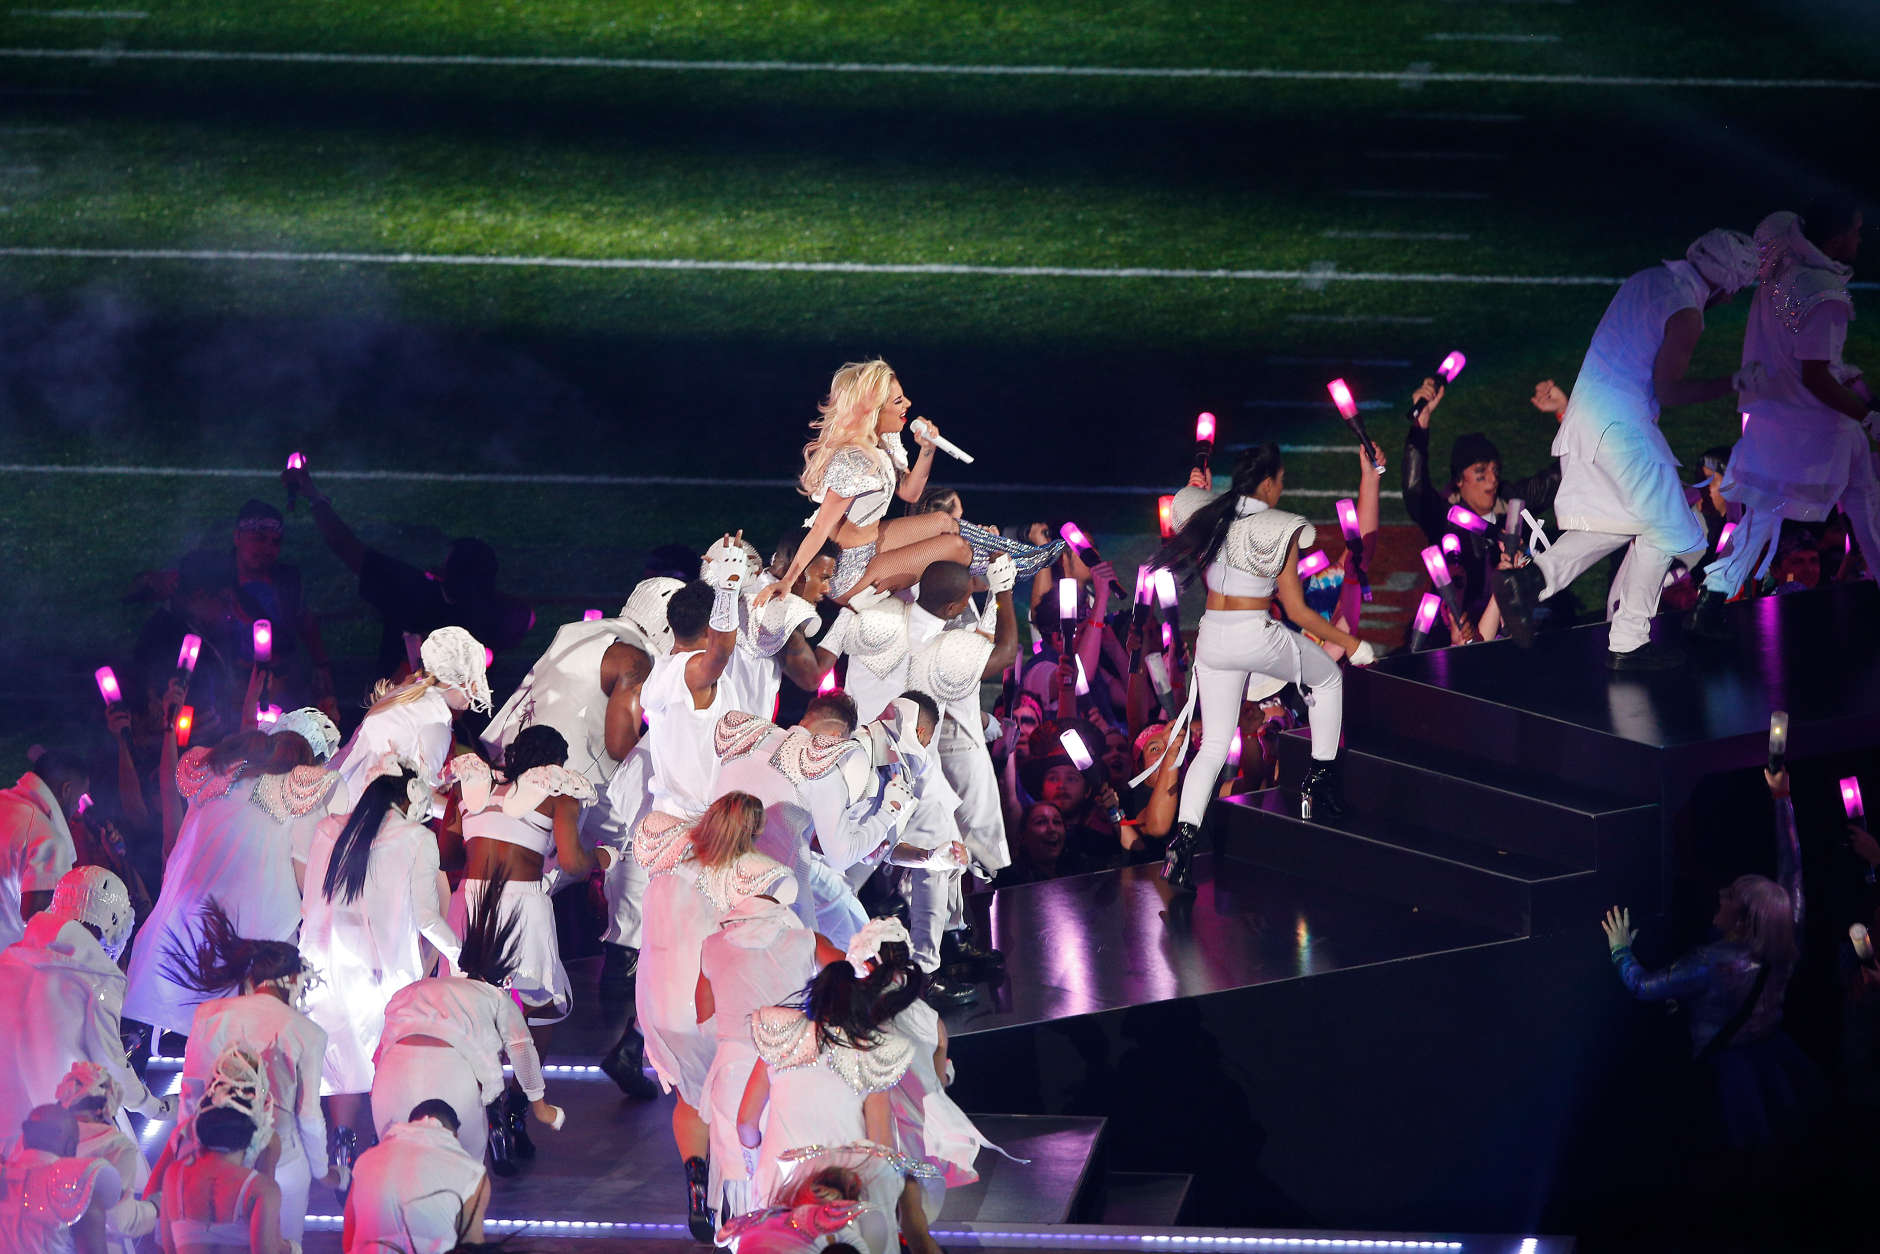 HOUSTON, TX - FEBRUARY 05:  Lady Gaga performs during the Pepsi Zero Sugar Super Bowl 51 Halftime Show at NRG Stadium on February 5, 2017 in Houston, Texas.  (Photo by Bob Levey/Getty Images)